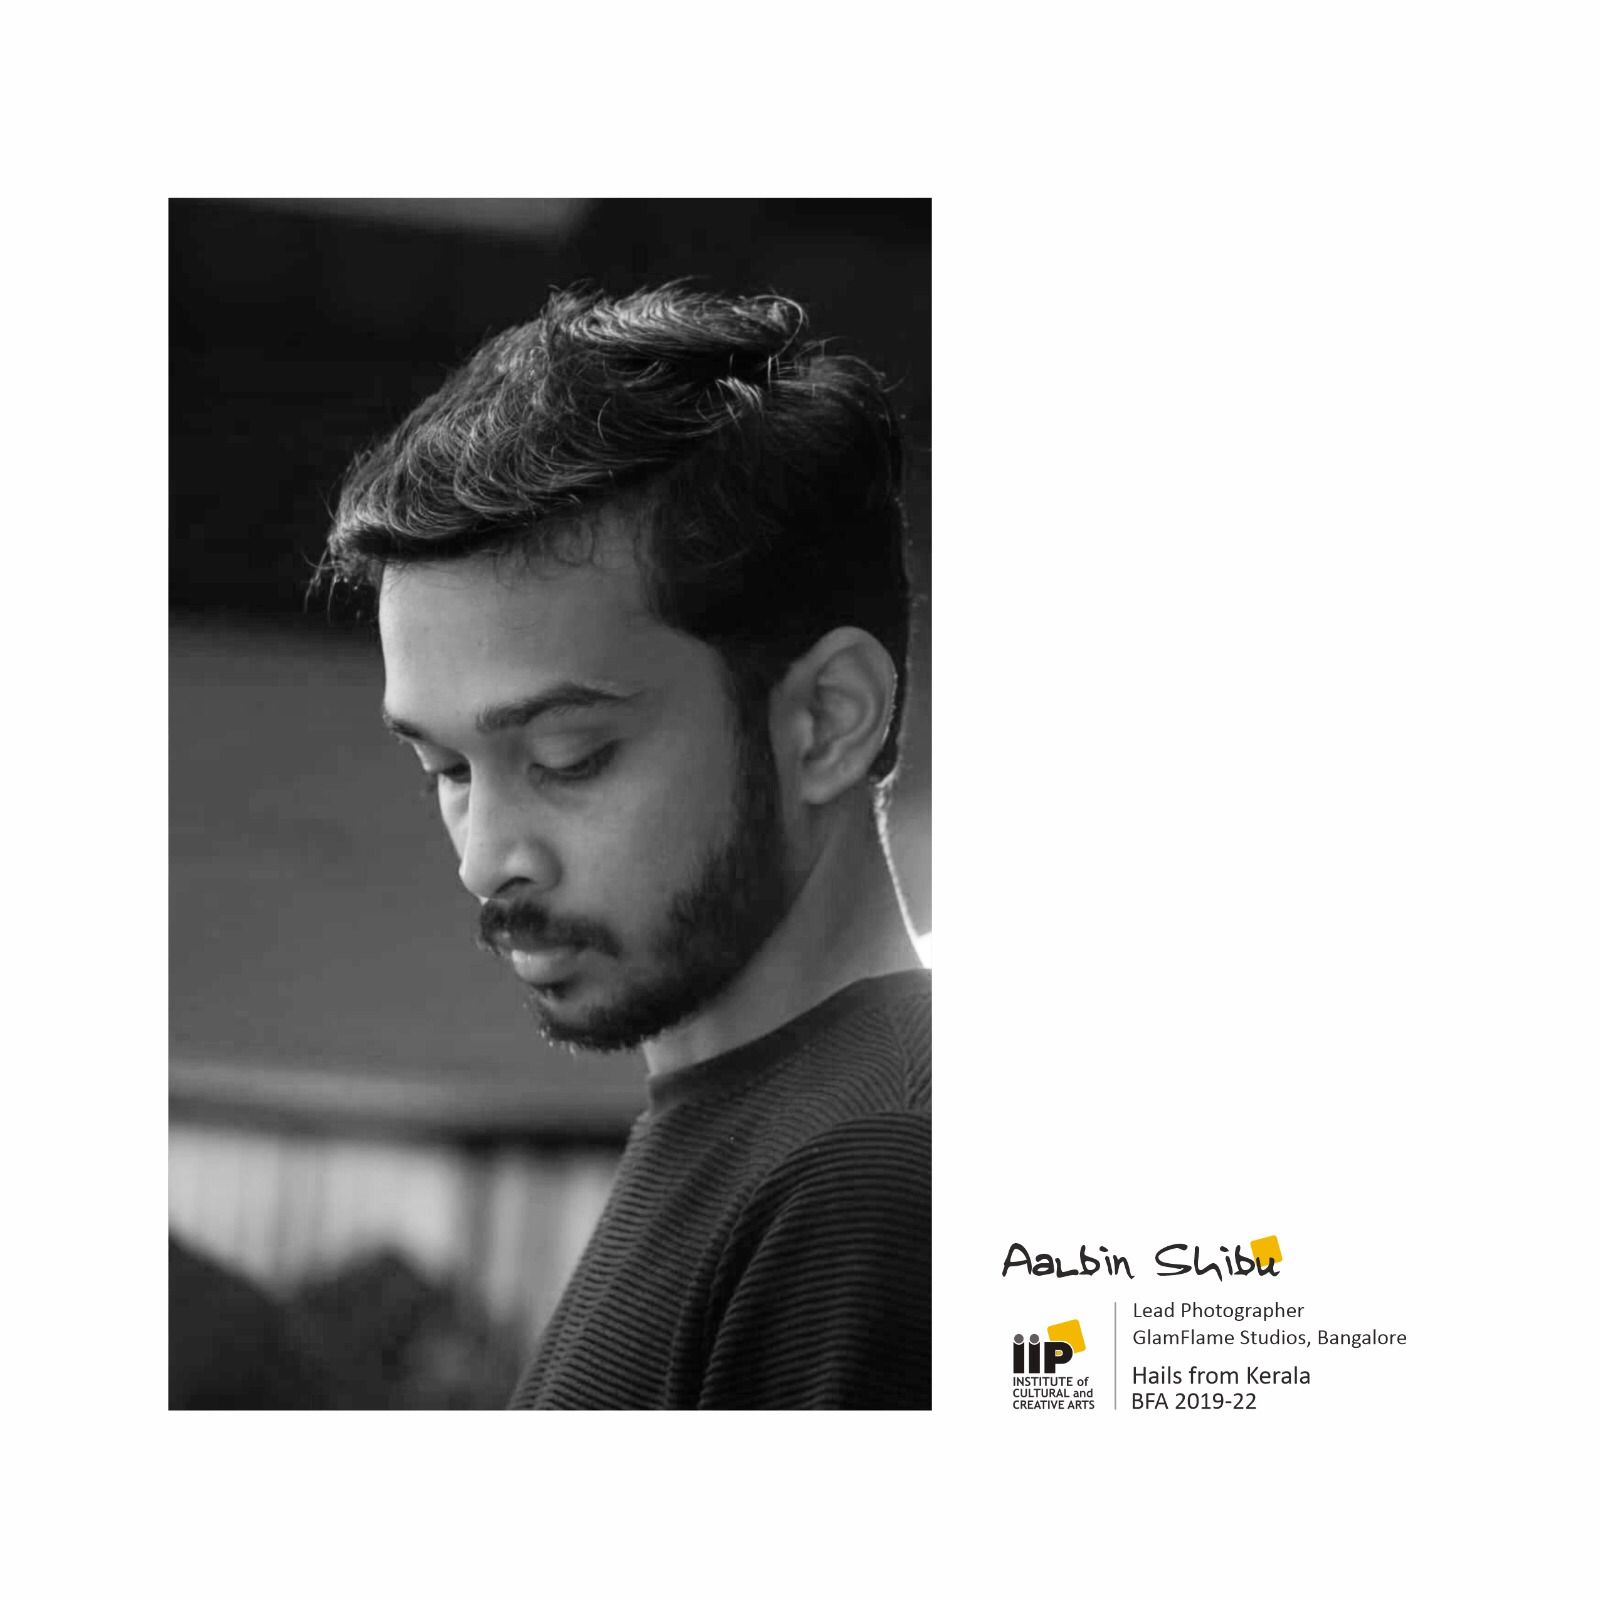 Introducing Aalbin Shibu, a talented photographer hailing from Kerala who has left an indelible mark on the world of visual arts